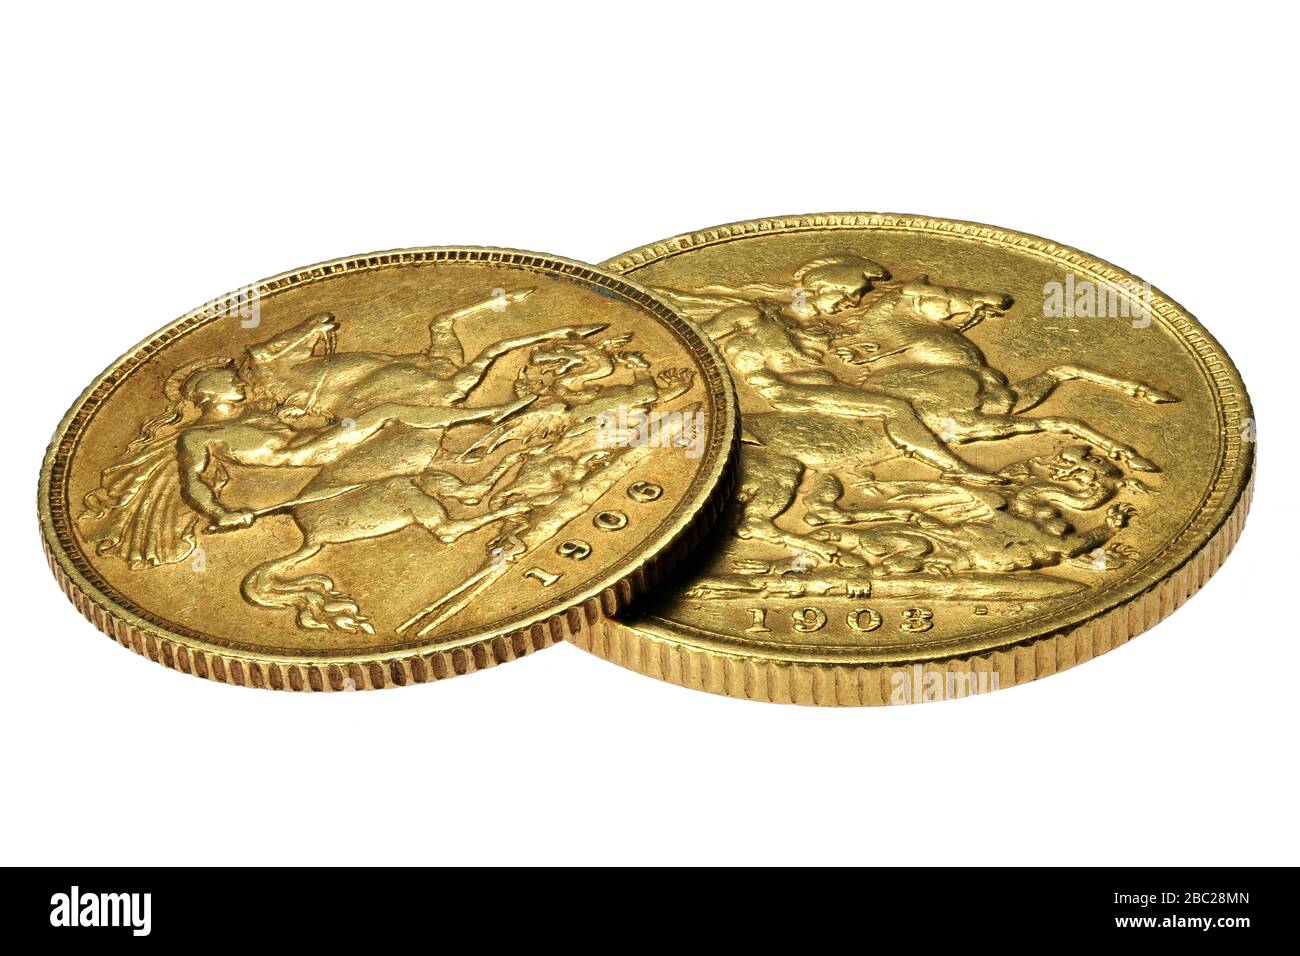 British full and half Sovereign gold coins (Edward VII) isolated on white background Stock Photo